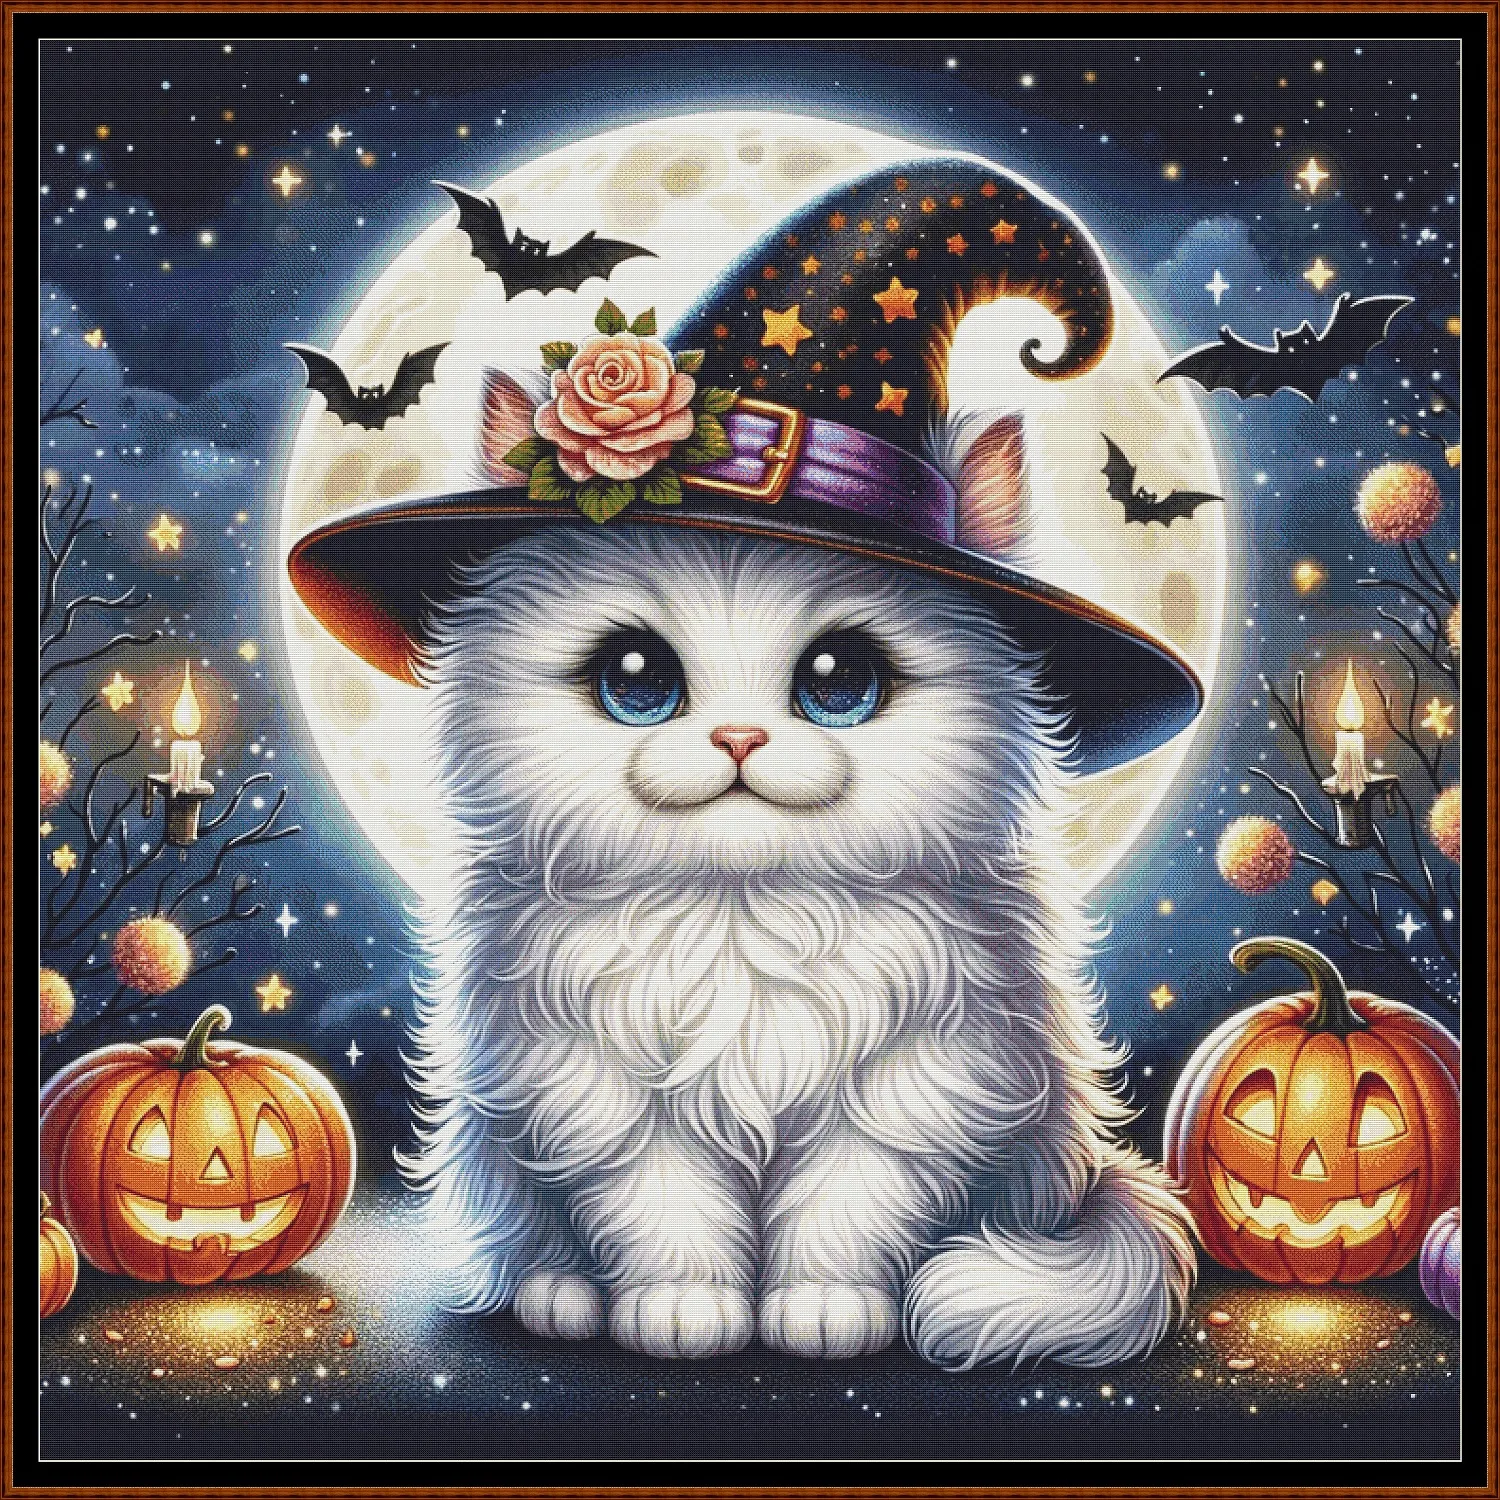 Expertly created from art by Bilal Bashir, under Public Domain CC0 license, Halloween Witchy Kitty cross stitch patterns.